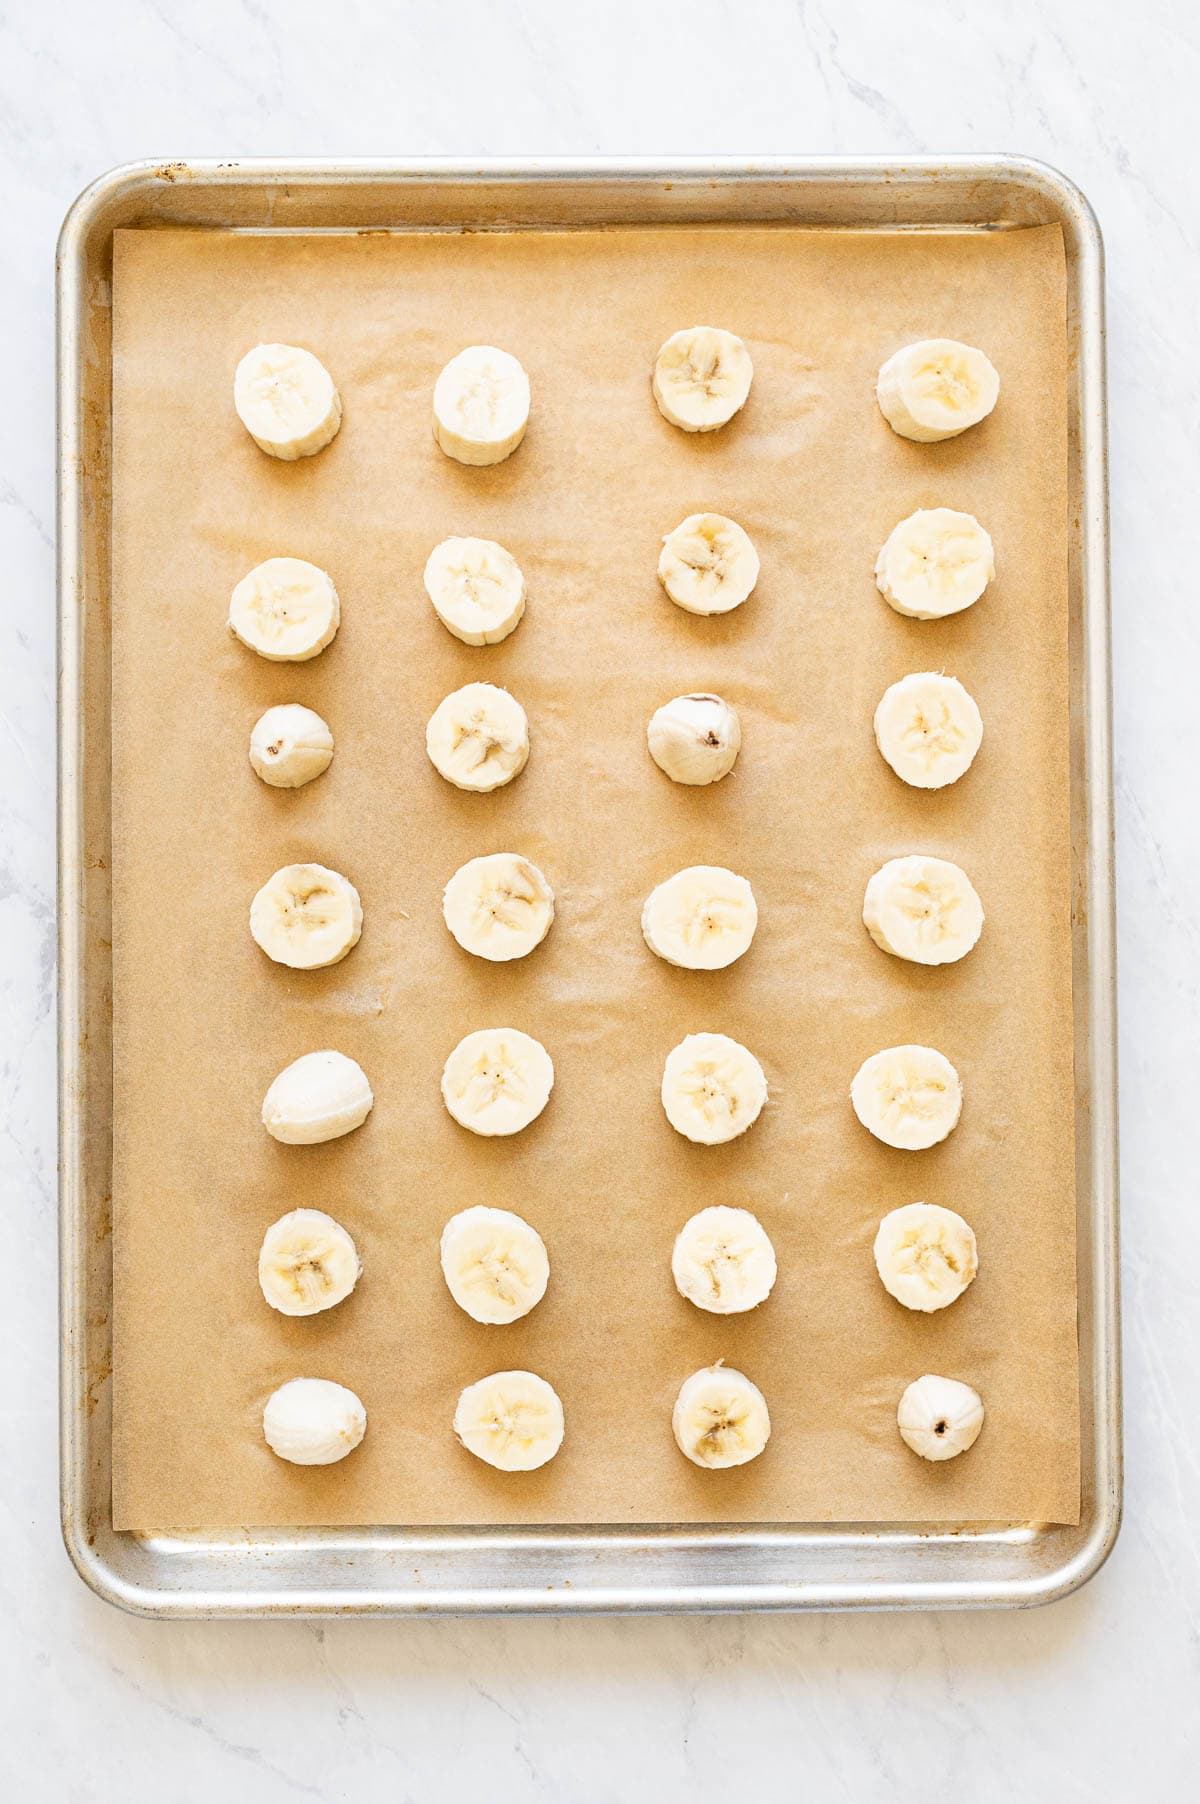 Banana slices on baking sheet lined with parchment paper.